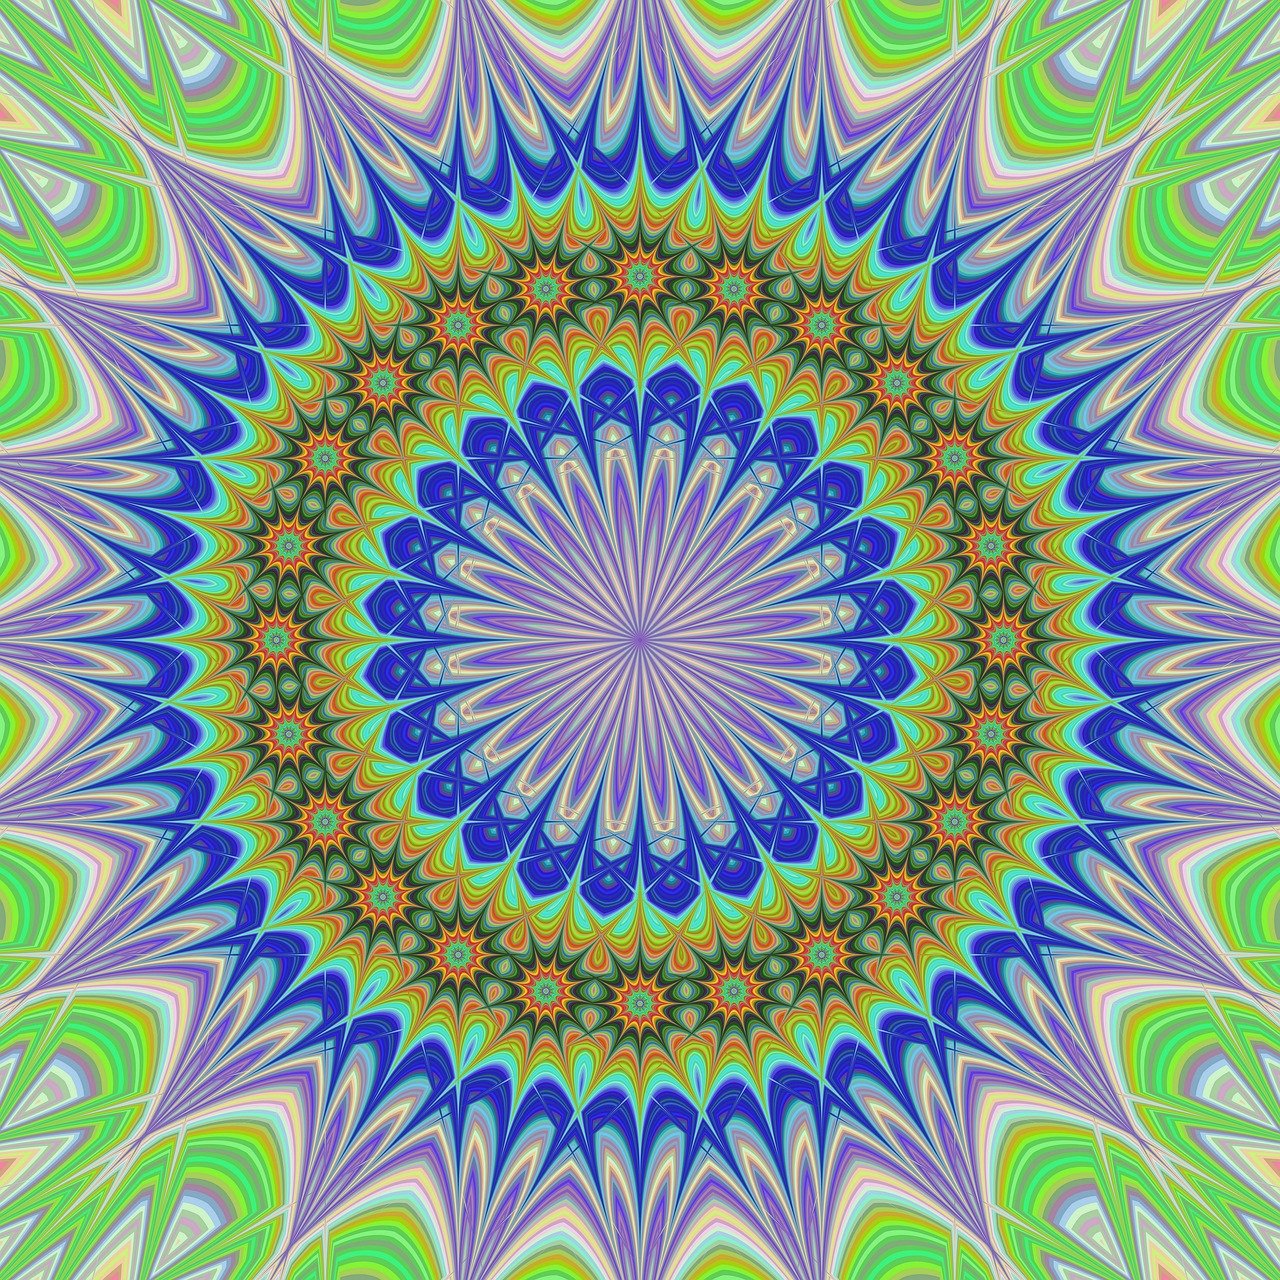 a computer generated image of a starburst, inspired by Benoit B. Mandelbrot, abstract illusionism, green and blue and warm theme, lying on a mandala, repeating pattern, stylized geometric flowers